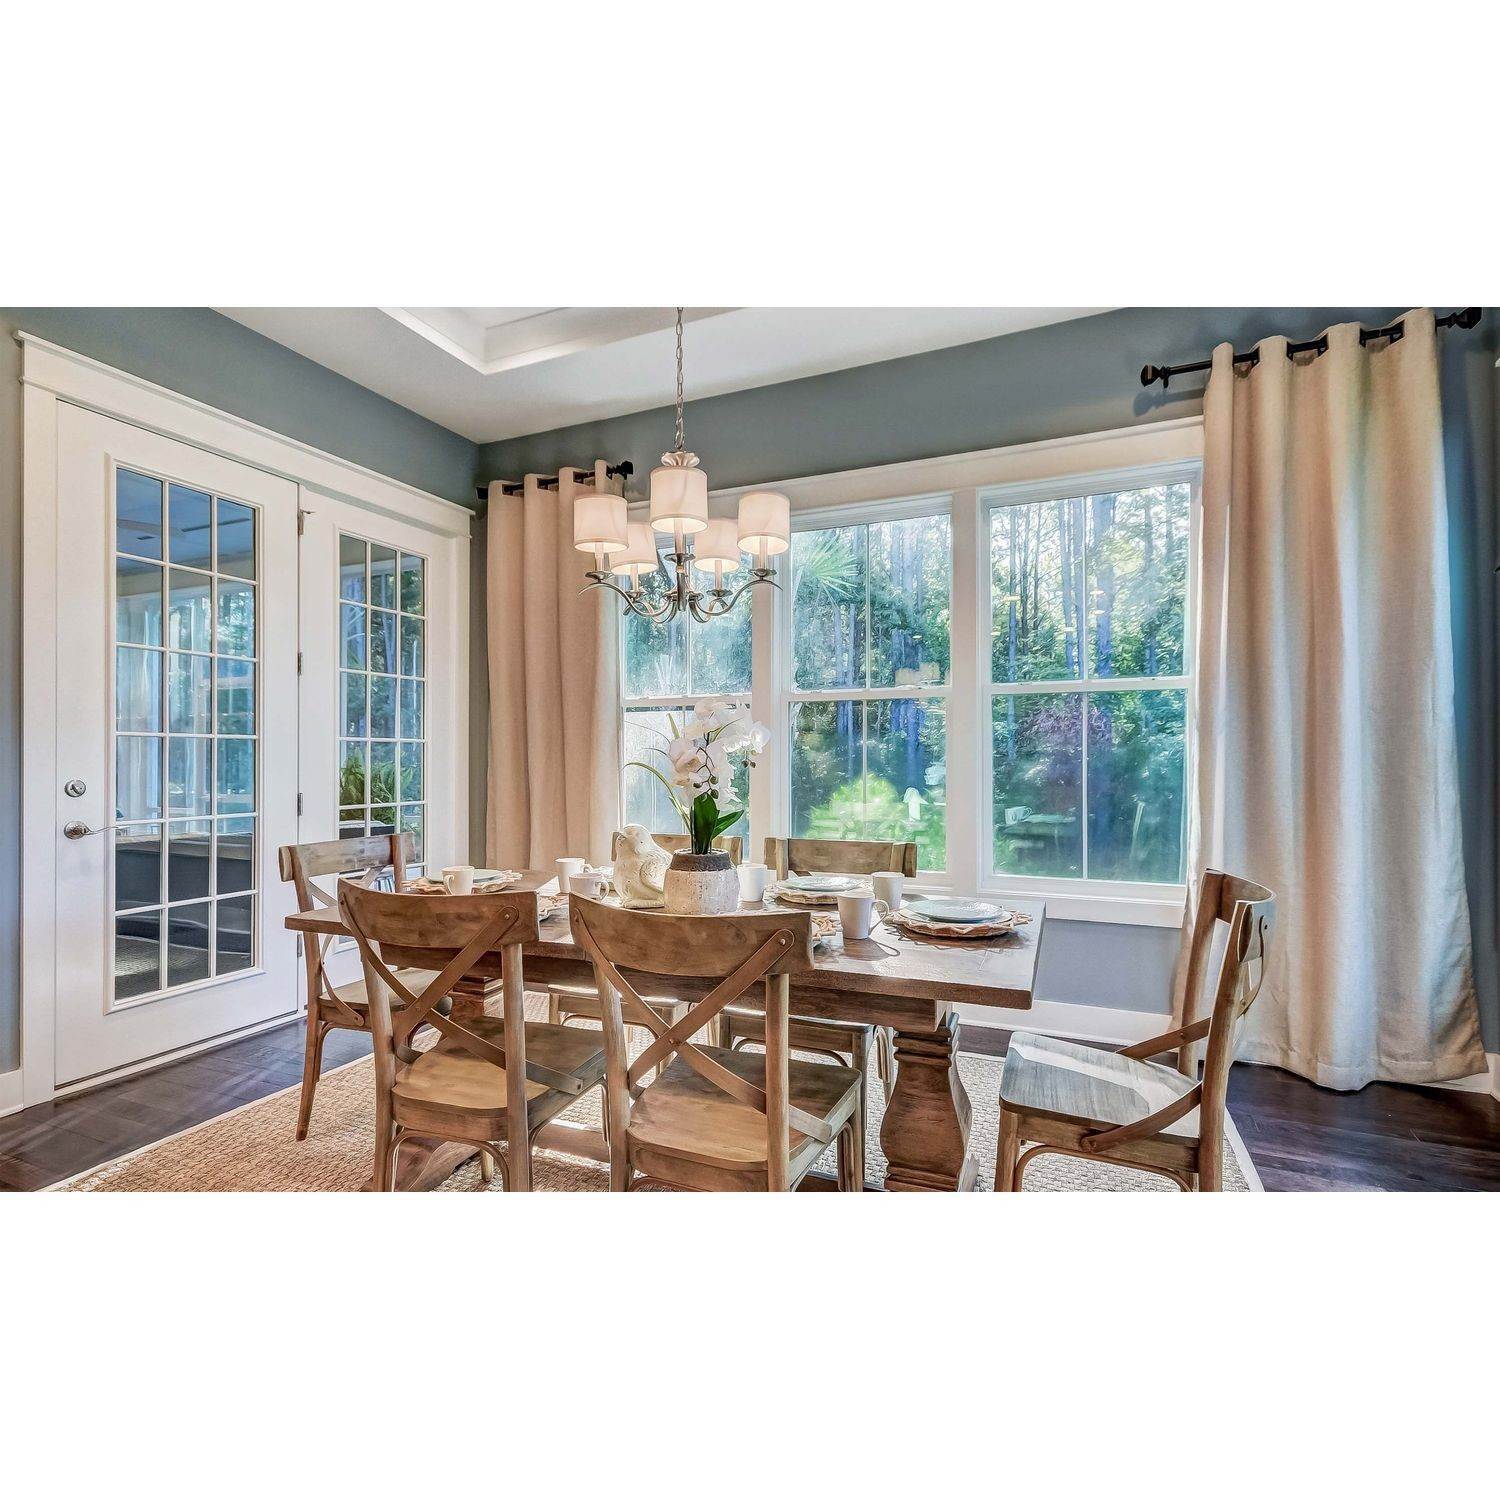 18. Single Family for Sale at K. Hovnanian's® Four Seasons At Kent Island - Sing 203 Bayberry Drive, Chester, MD 21619